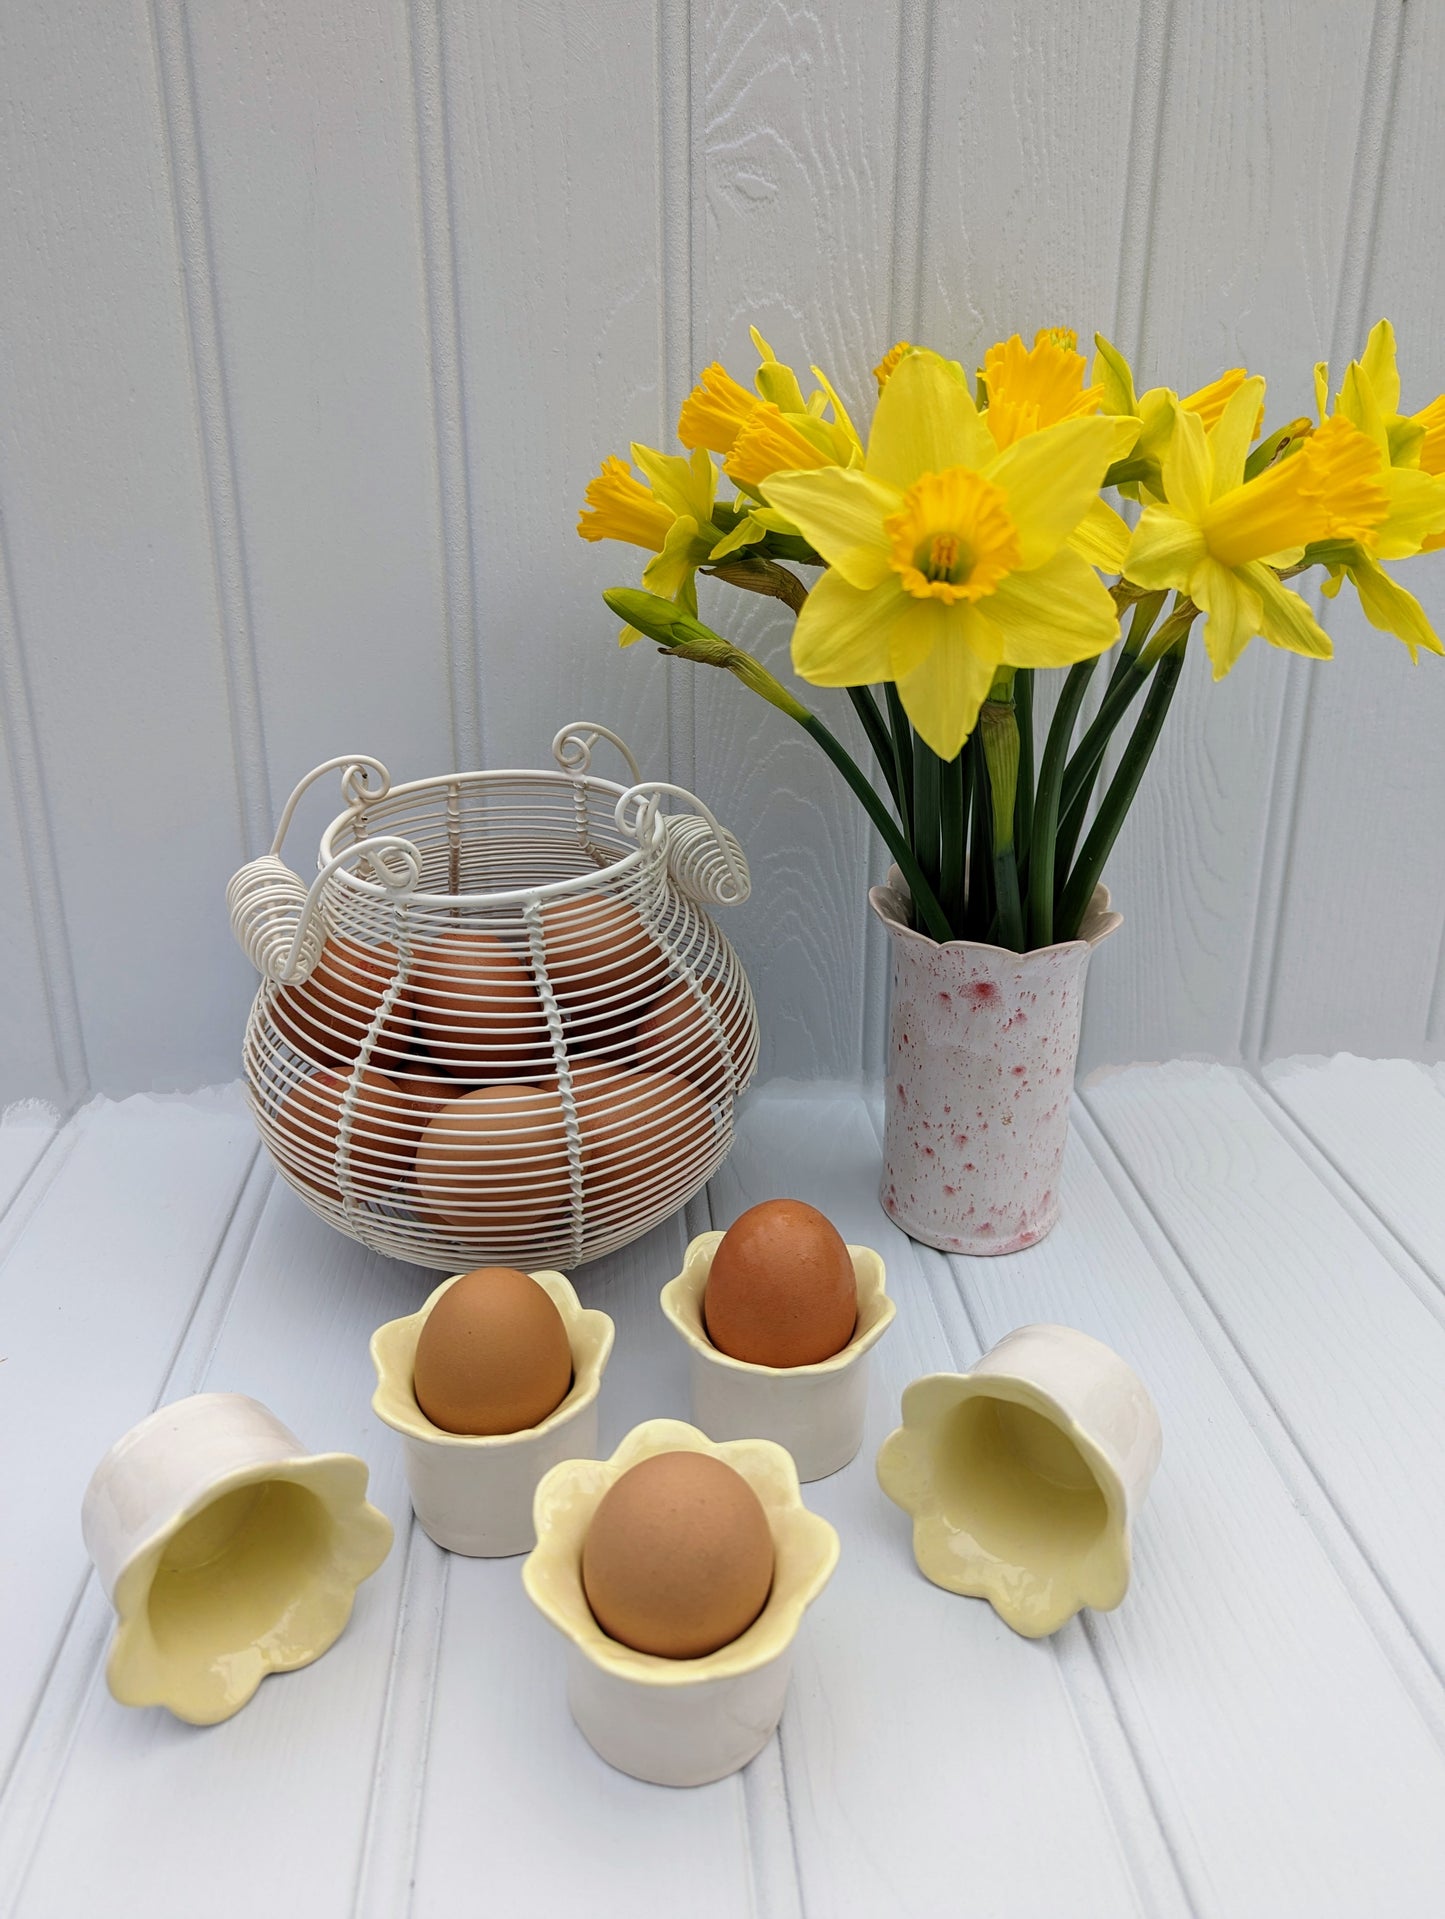 Sea Bramble Ceramics - Handmade Earthenware Daisy egg cups with a scalloped top and glazed with a white exterior and yellow interior. Shown here with eggs, egg basket and a beautiful bunch of daffodils in a red speckled Sea Bramble Daisy vase.